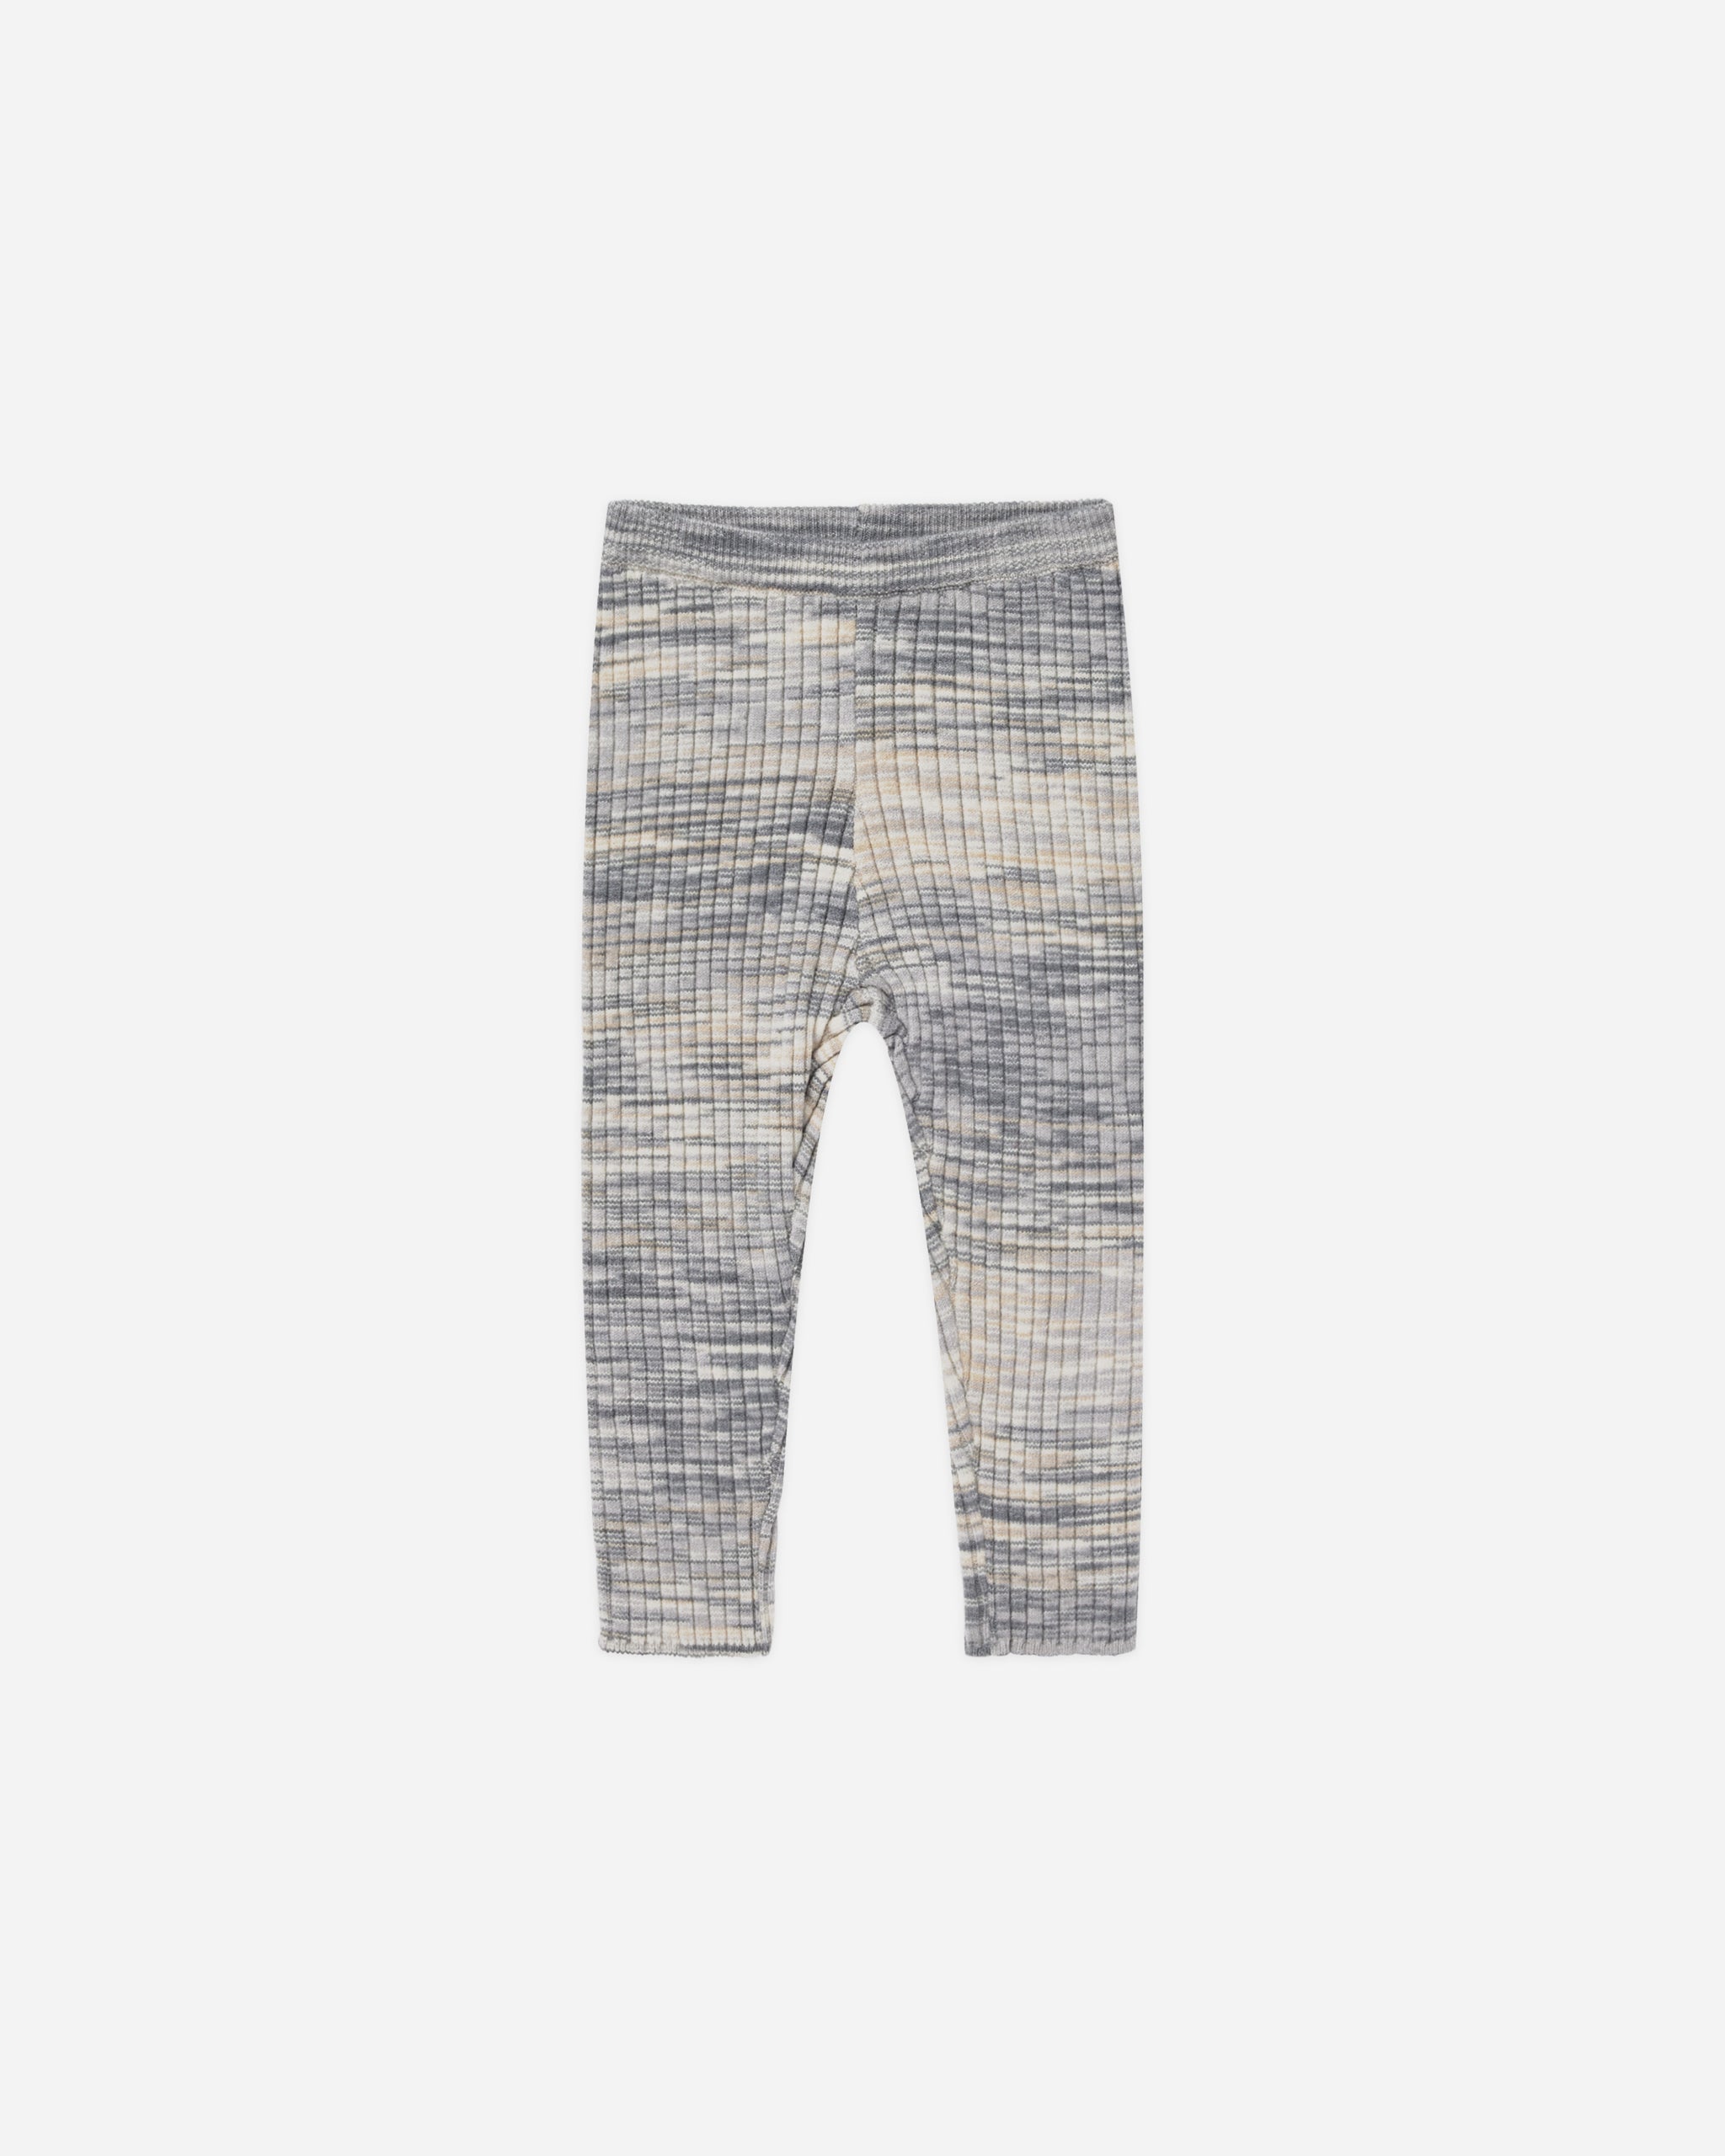 Ribbed Legging || Blue Space Dye - Rylee + Cru | Kids Clothes | Trendy Baby Clothes | Modern Infant Outfits |